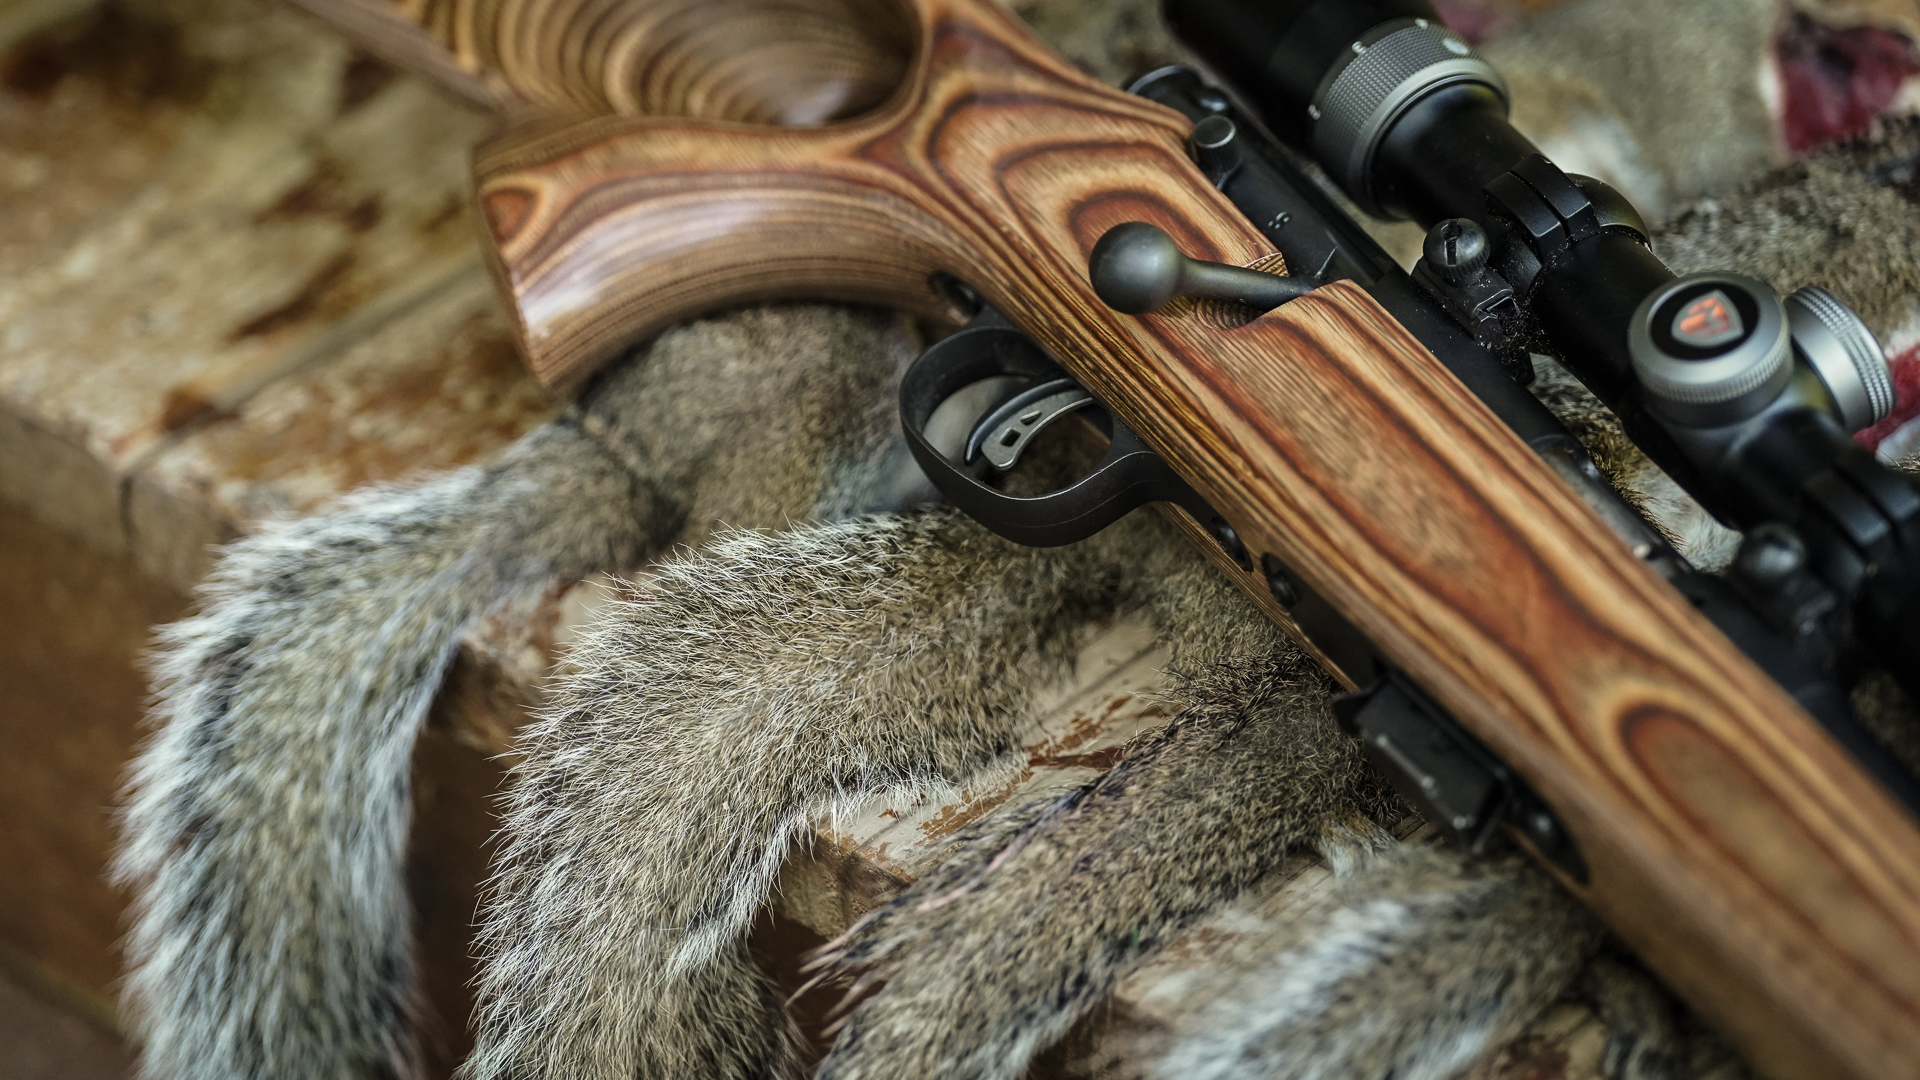 The MK II is an accurate squirrel rifle.